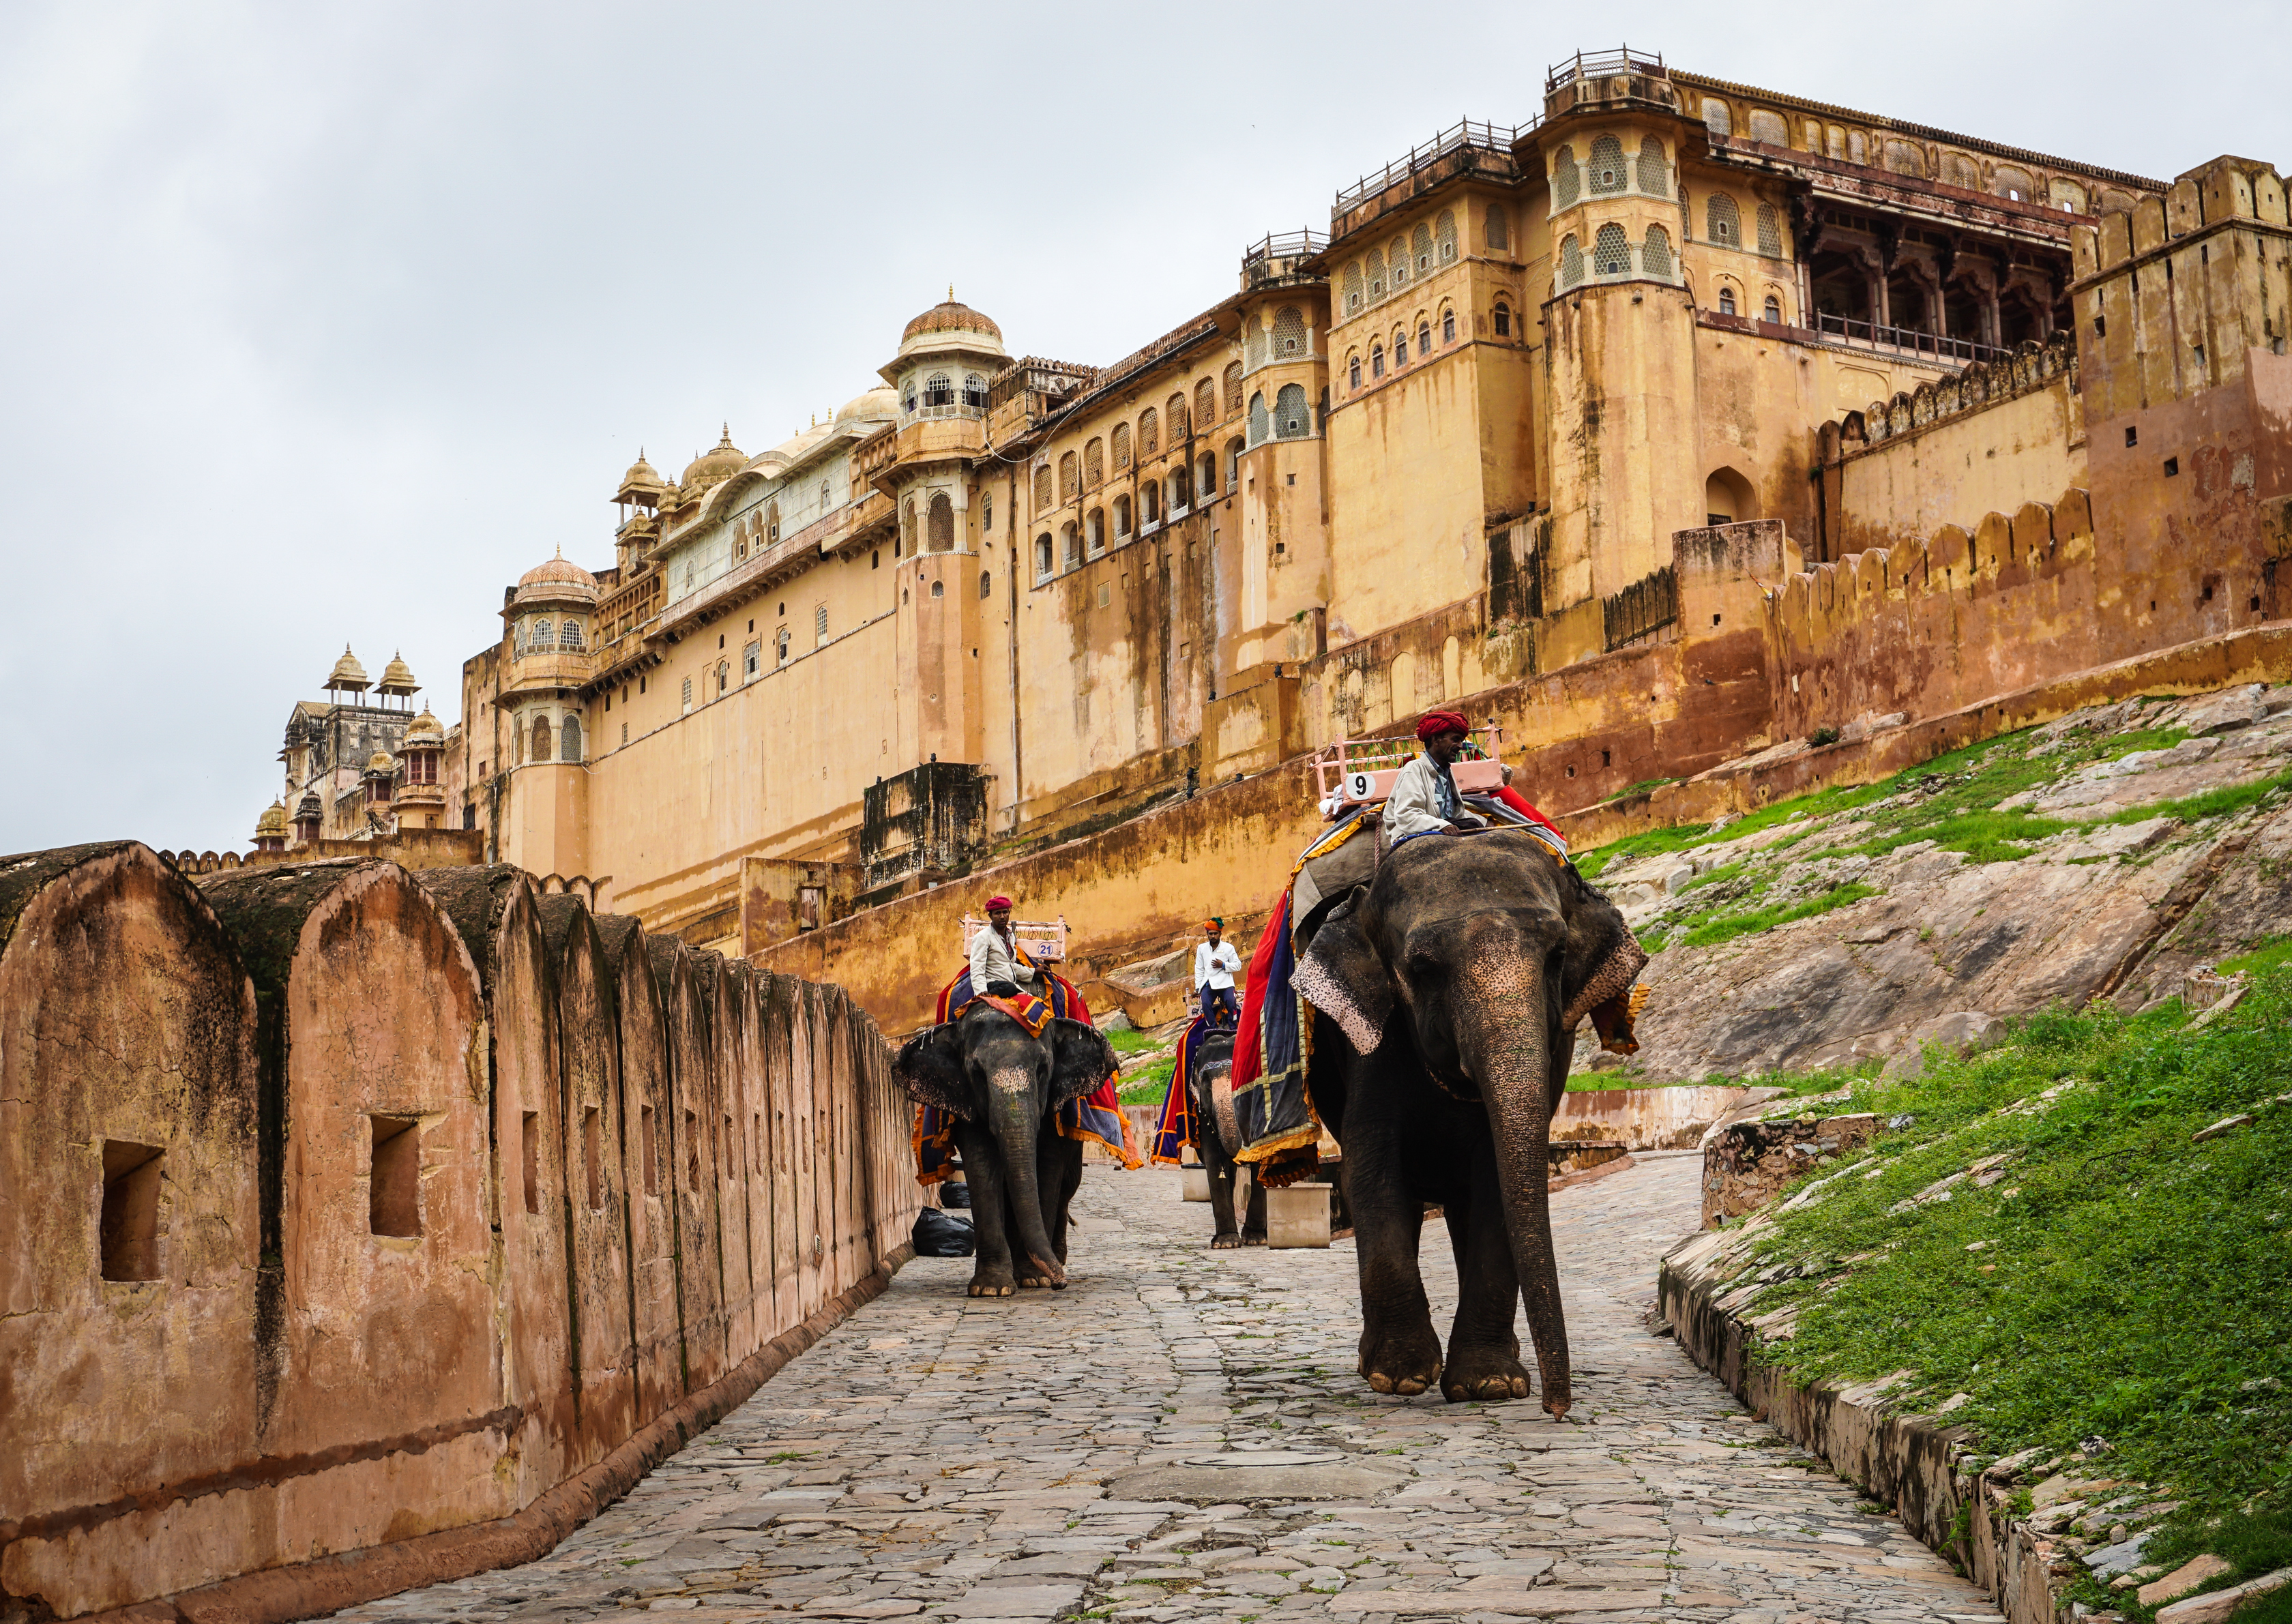 Amber Fort is India's Fortress of Strength